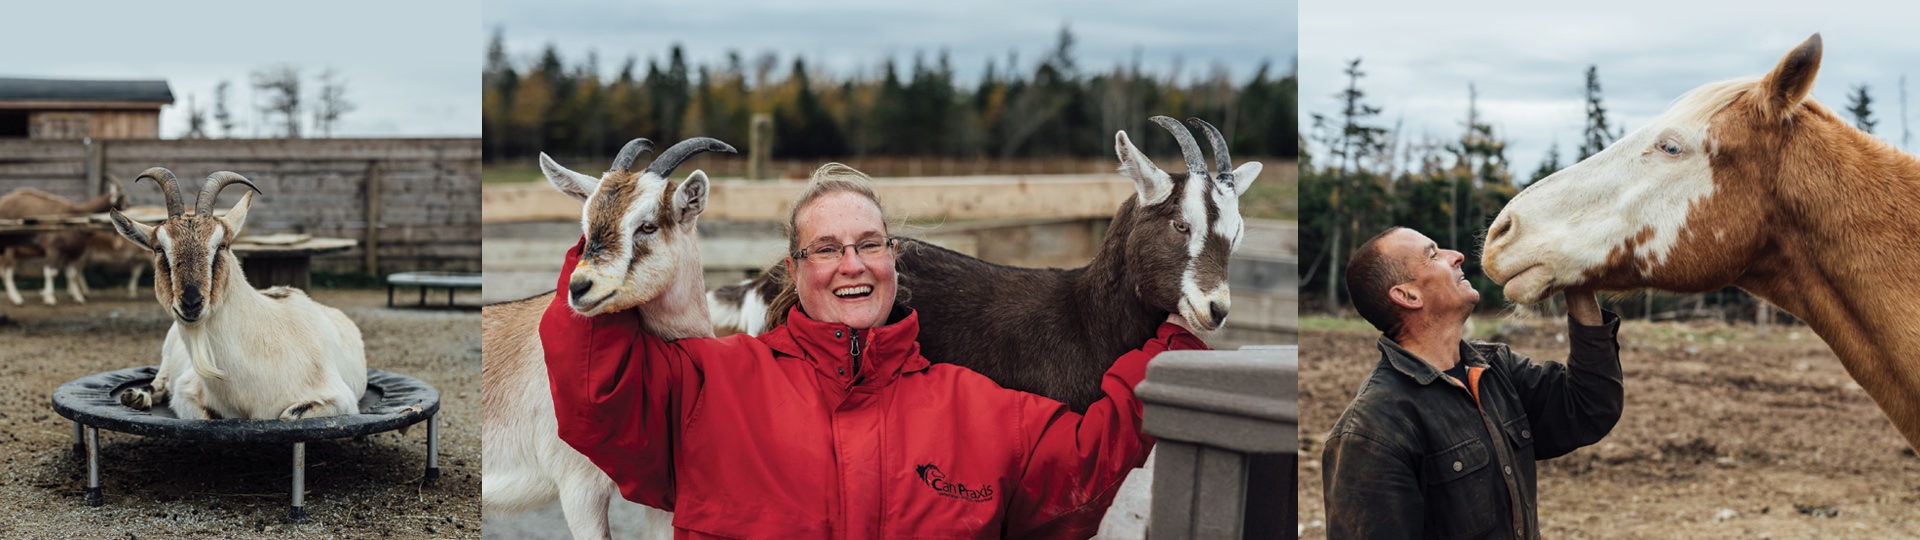 Ataraxy Farm in Lawrencetown, Nova Scotia is a therapy farm with over 40 goats, 5 horses, 3 donkeys and a mule.